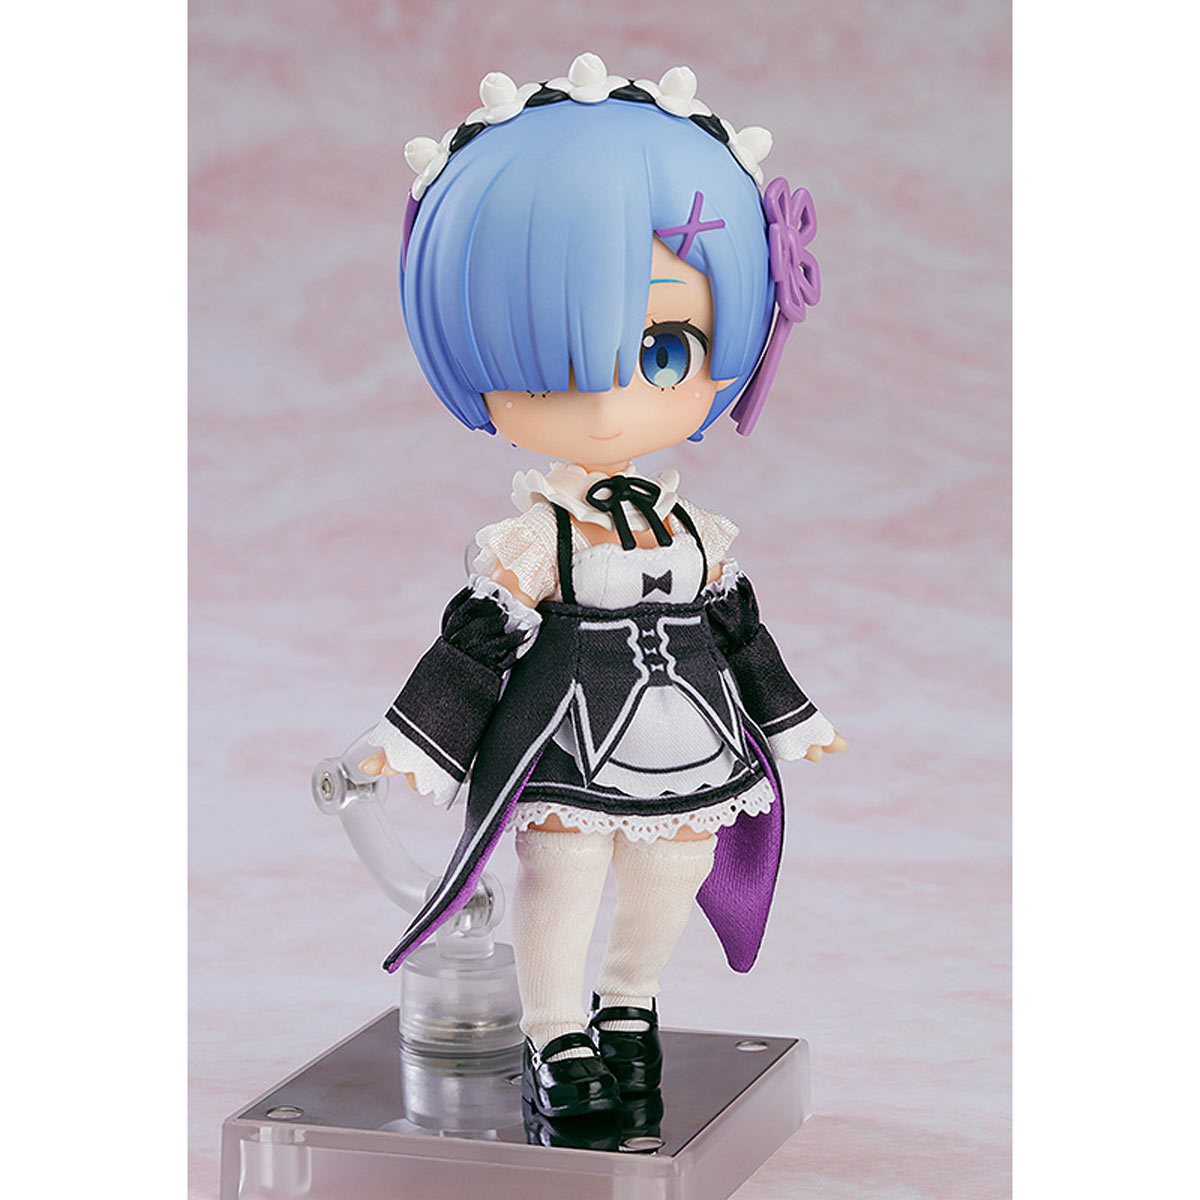 Re:Zero - Starting Life in Another World - Rem Figure Good Smile Company Nendoroid Doll